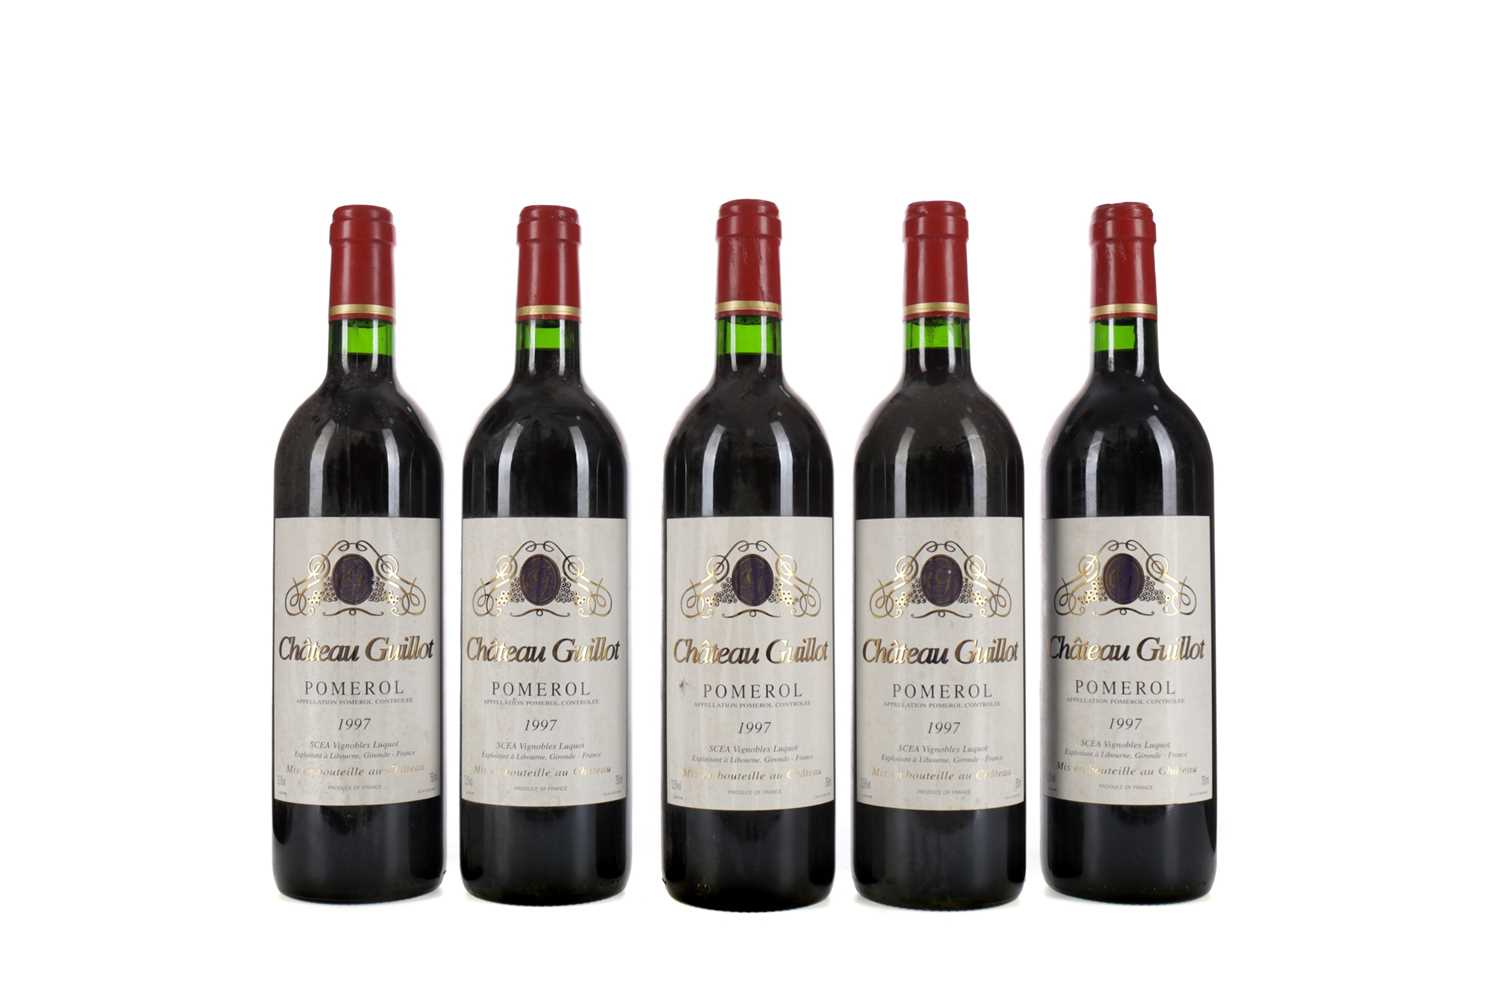 Lot 59 - FIVE BOTTLES OF CHATEAU GUILLOT 1997